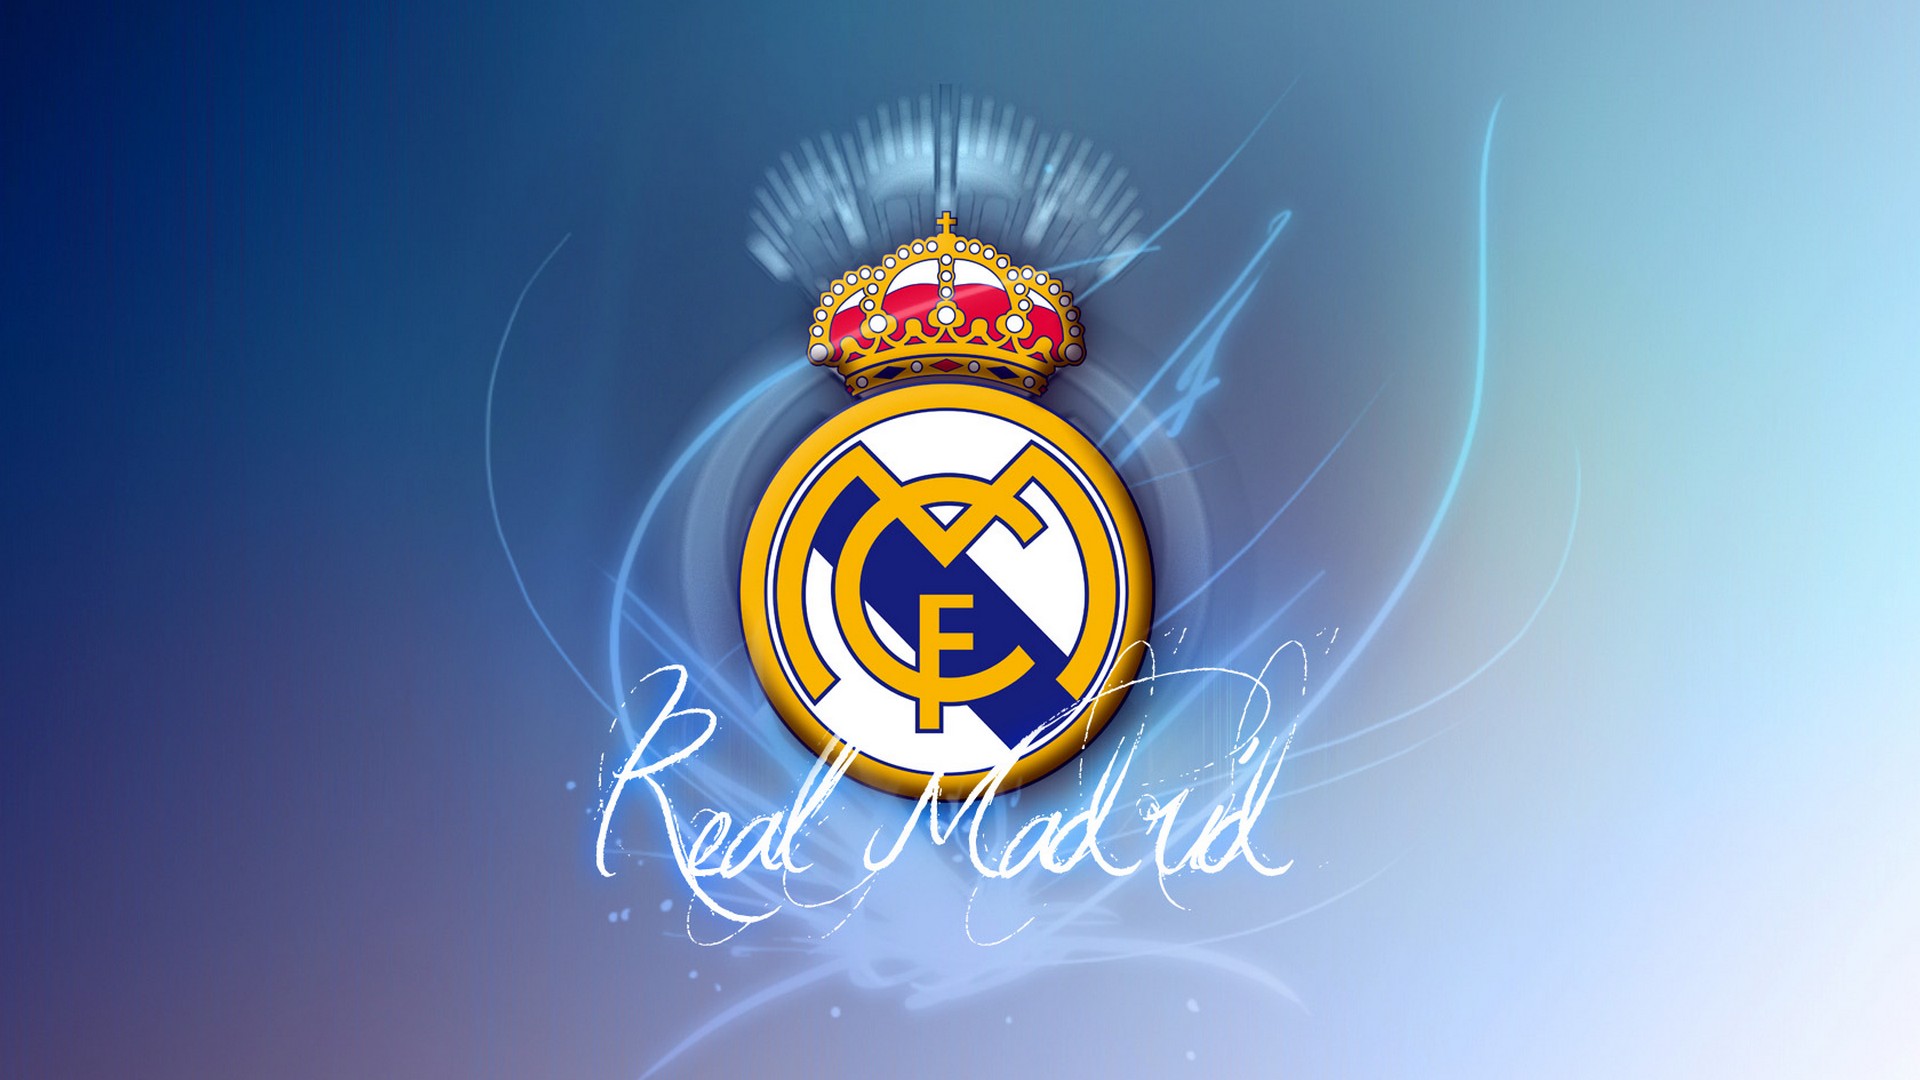 HD Real Madrid Backgrounds With Resolution 1920X1080 pixel. You can make this wallpaper for your Mac or Windows Desktop Background, iPhone, Android or Tablet and another Smartphone device for free